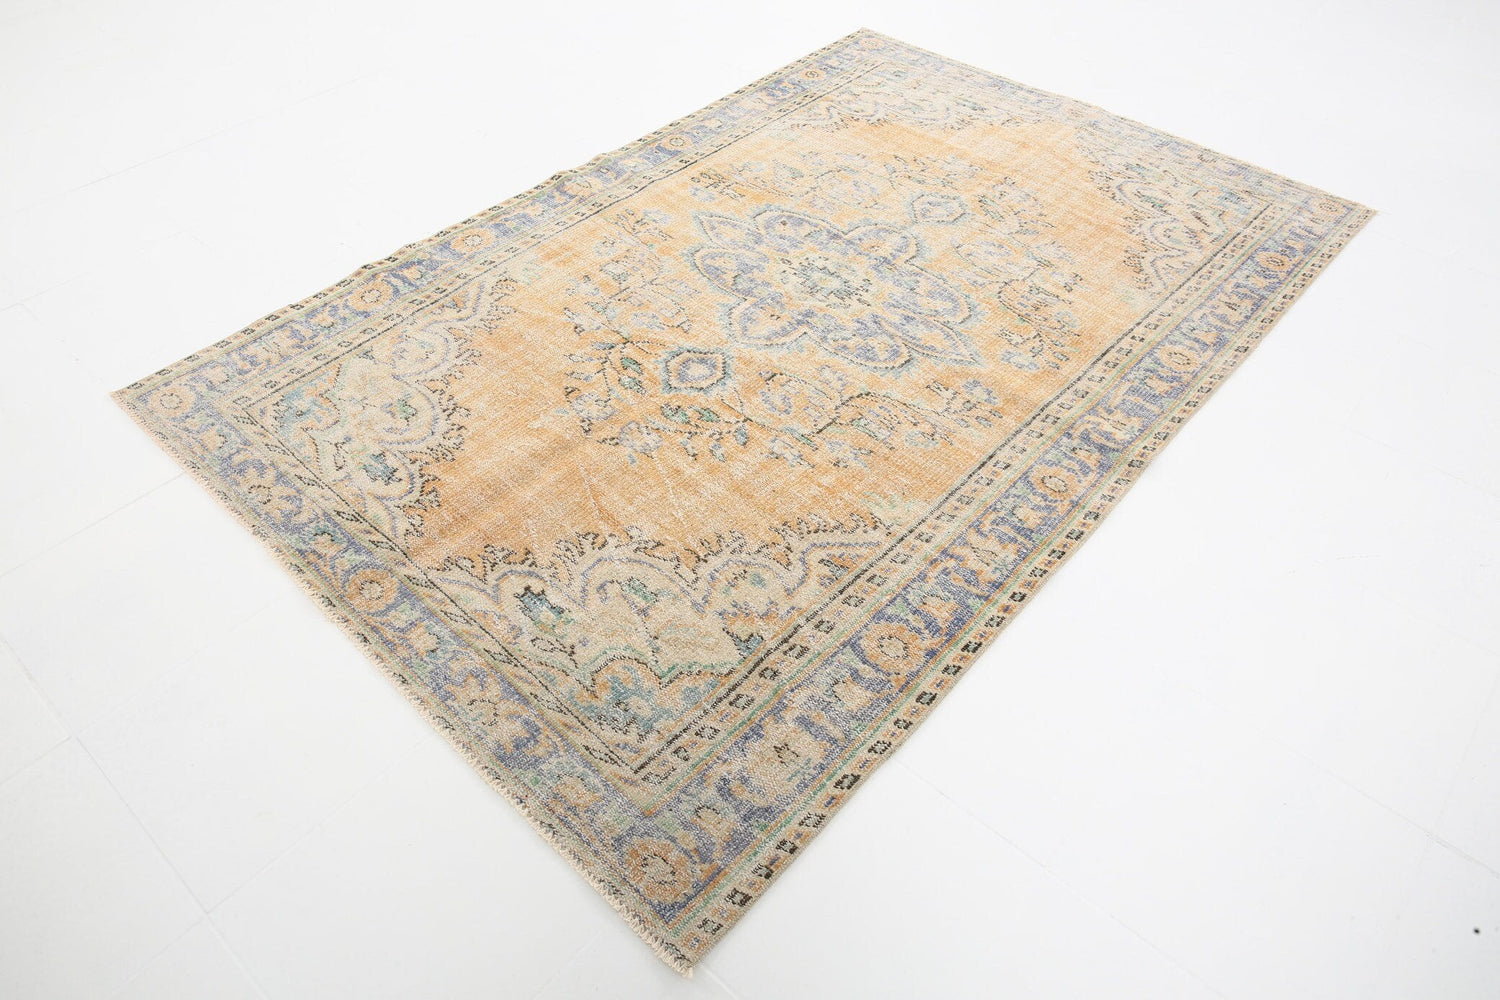 Large Size 3' x 5' 8' x 10' Vintage rugs